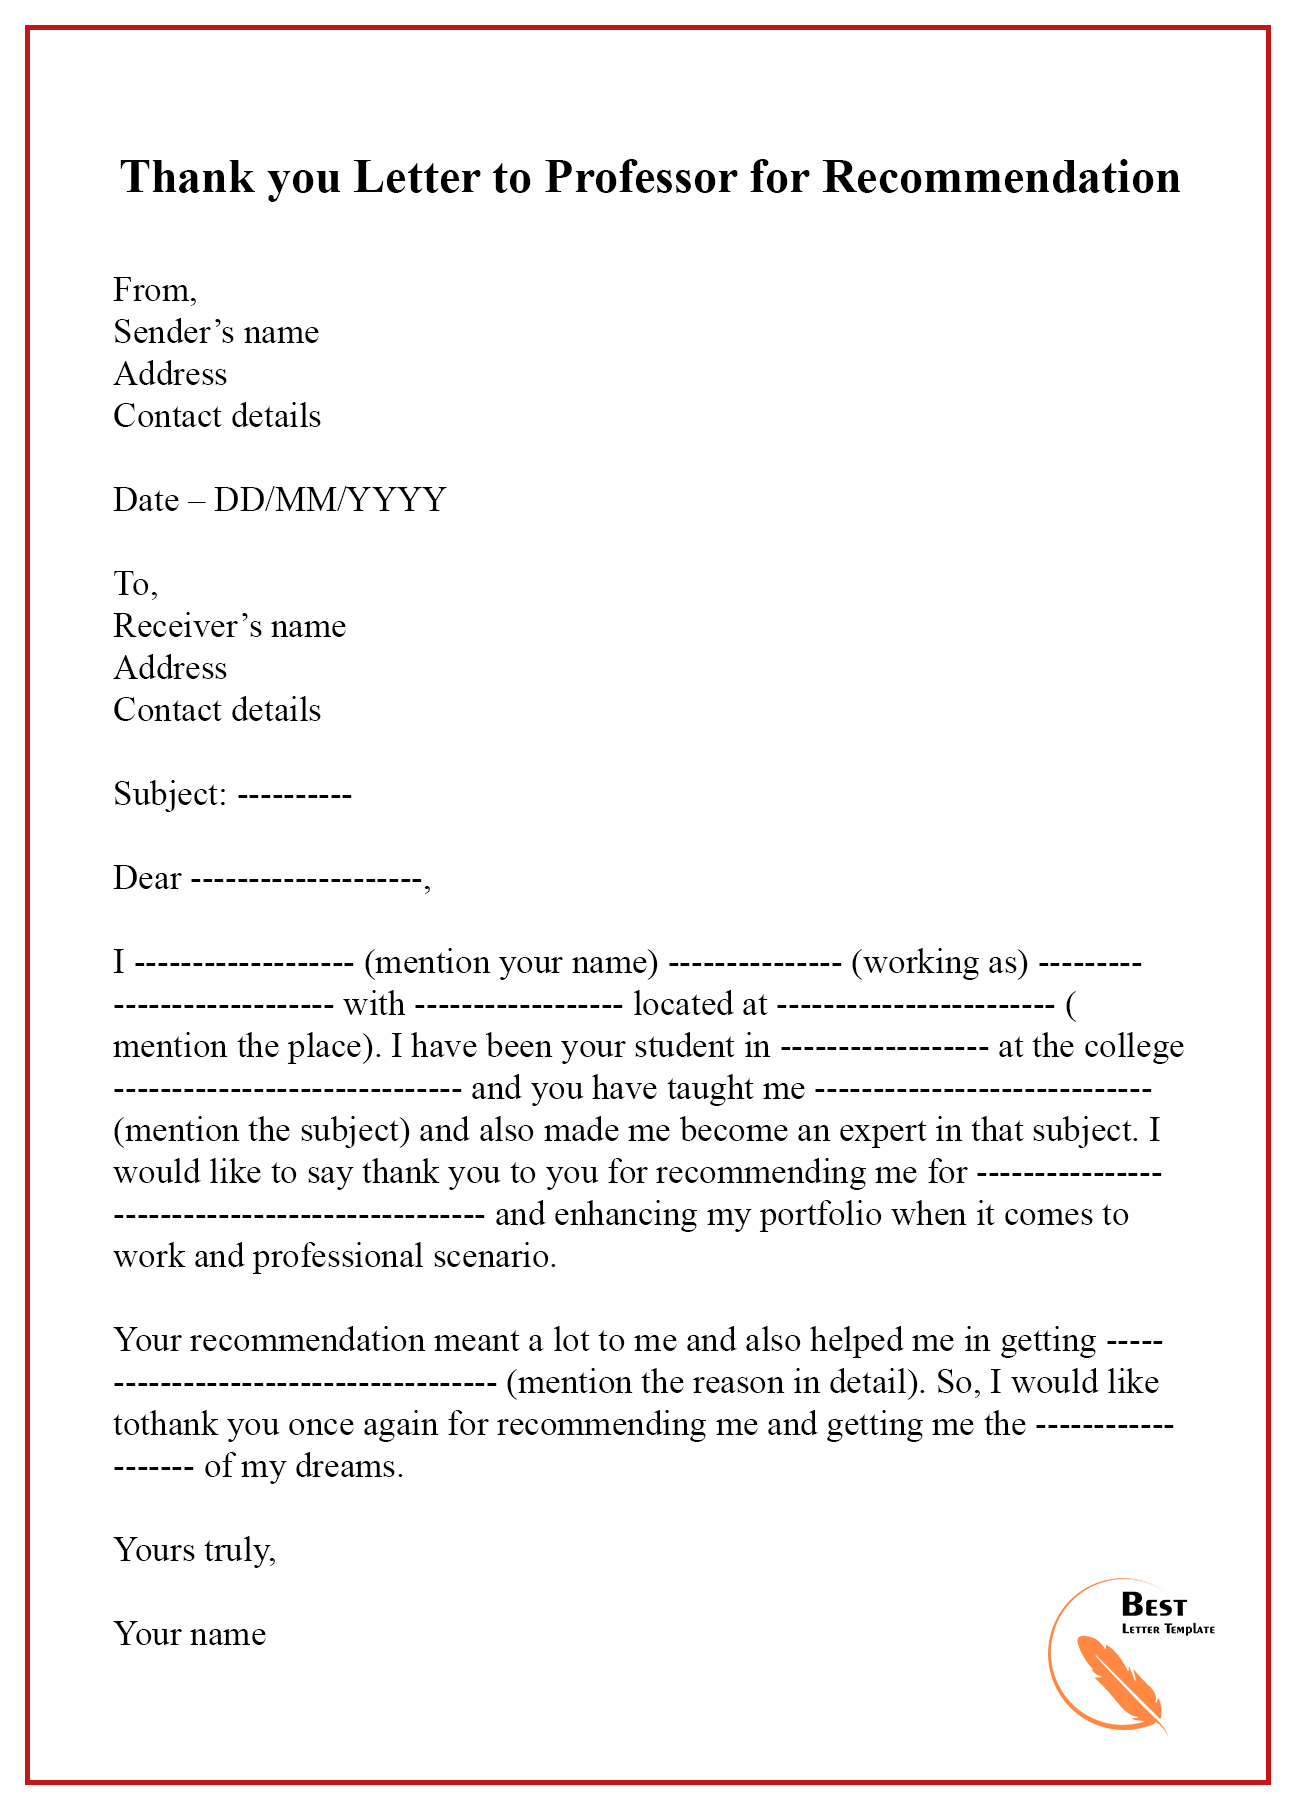 Thank You For Letter Of Recommendation from bestlettertemplate.com